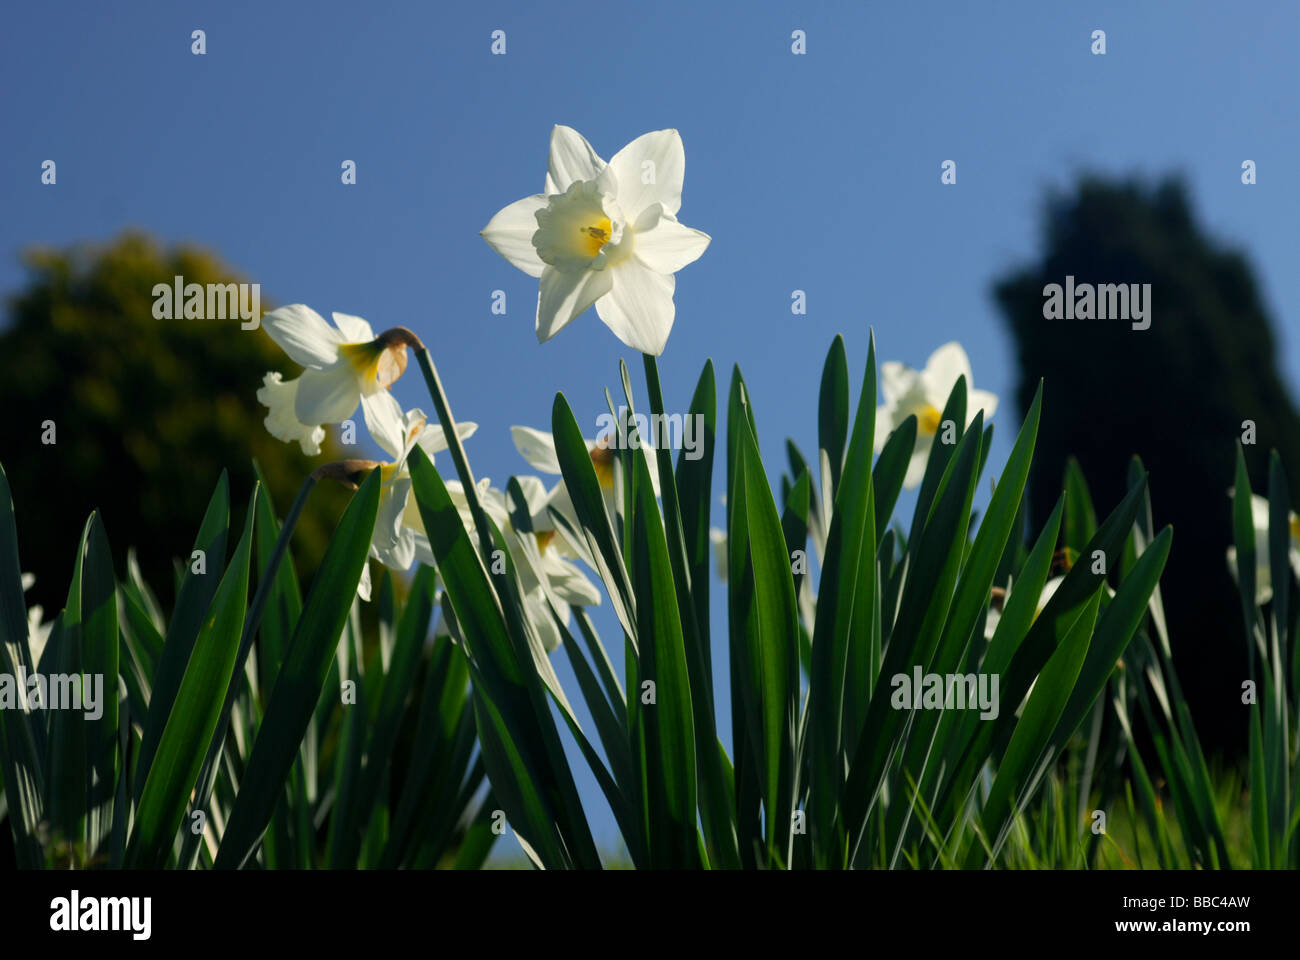 worms eye view of Narcissus against a bright blue sky Stock Photo